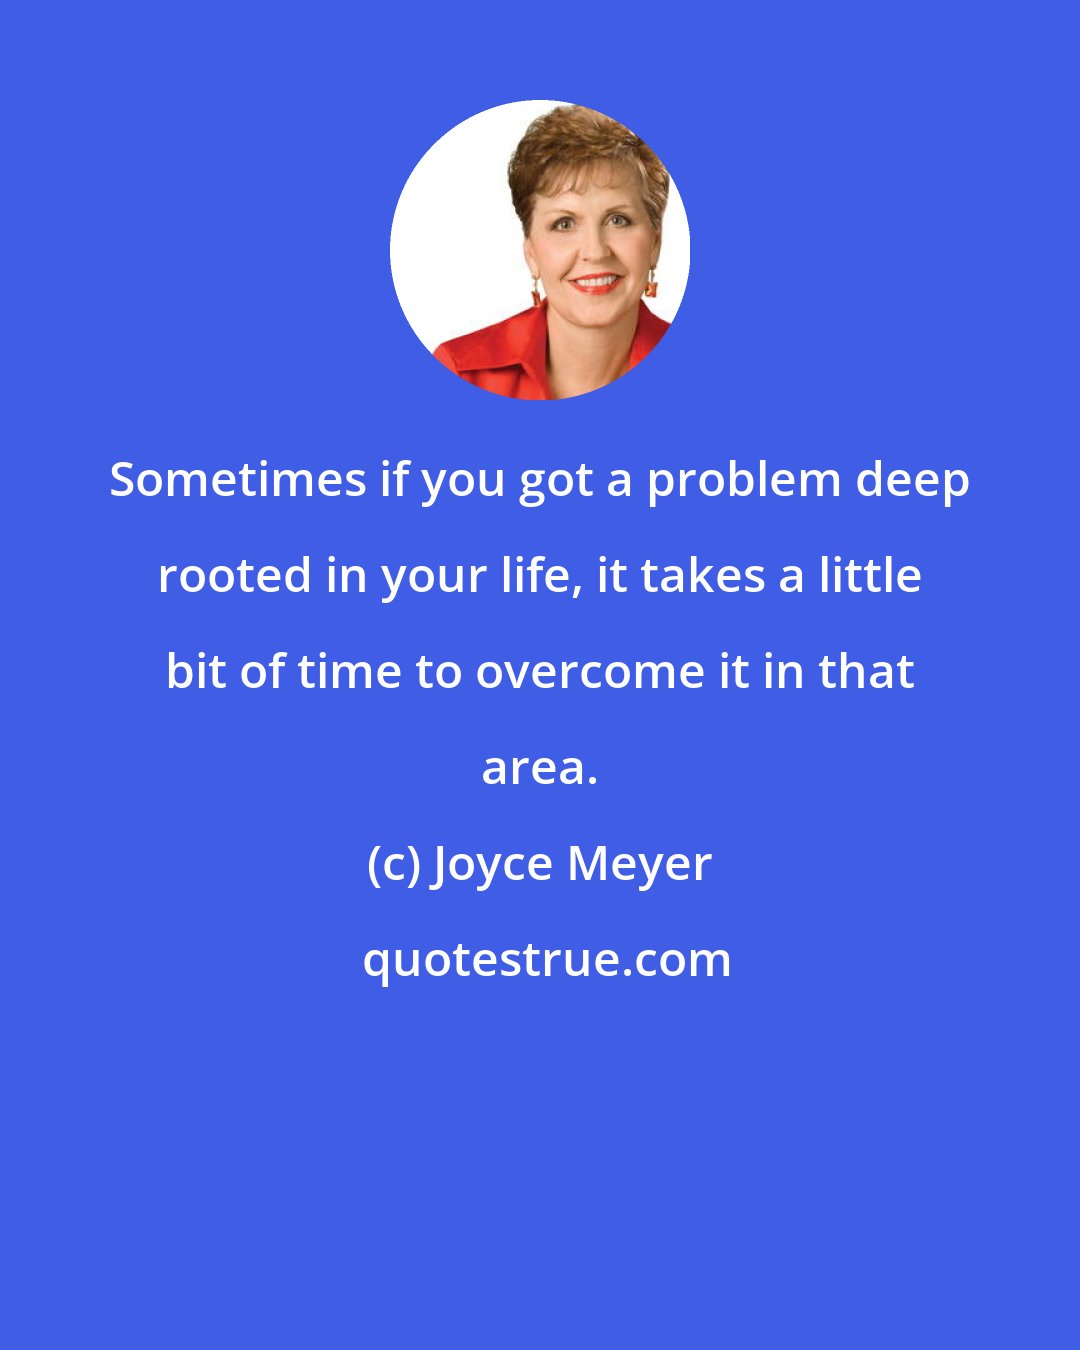 Joyce Meyer: Sometimes if you got a problem deep rooted in your life, it takes a little bit of time to overcome it in that area.